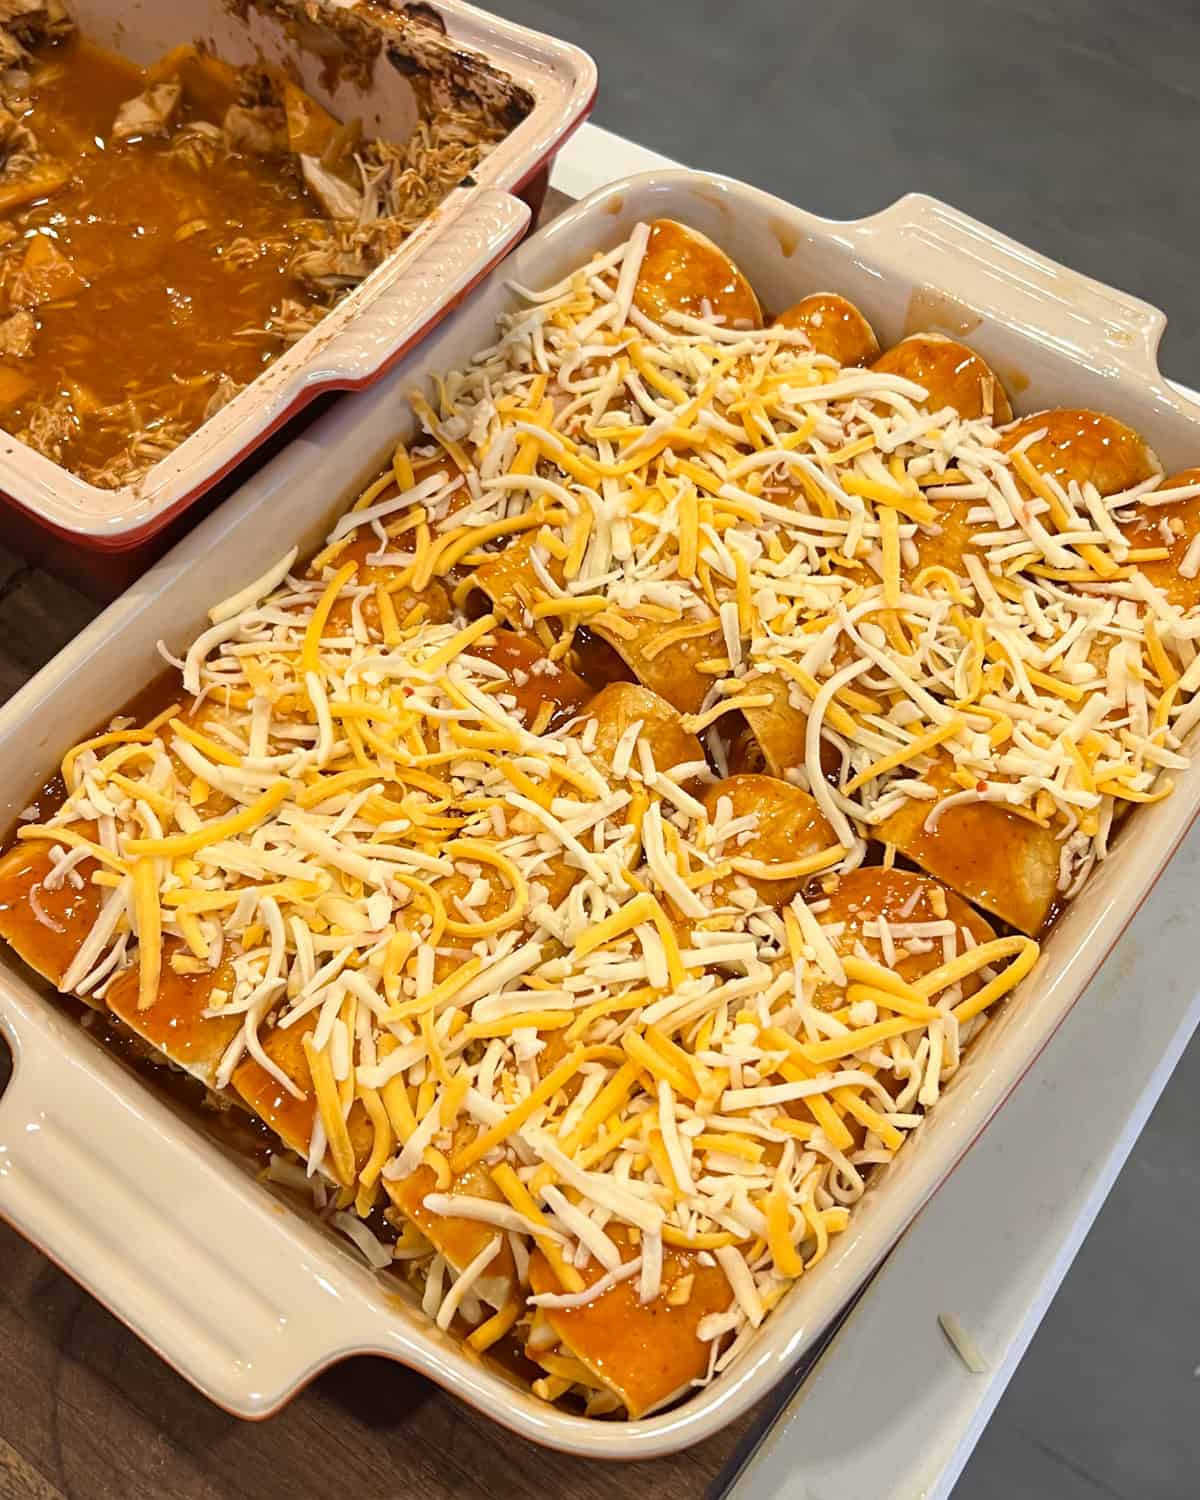 Enchiladas with grated cheese sprinkled on top.